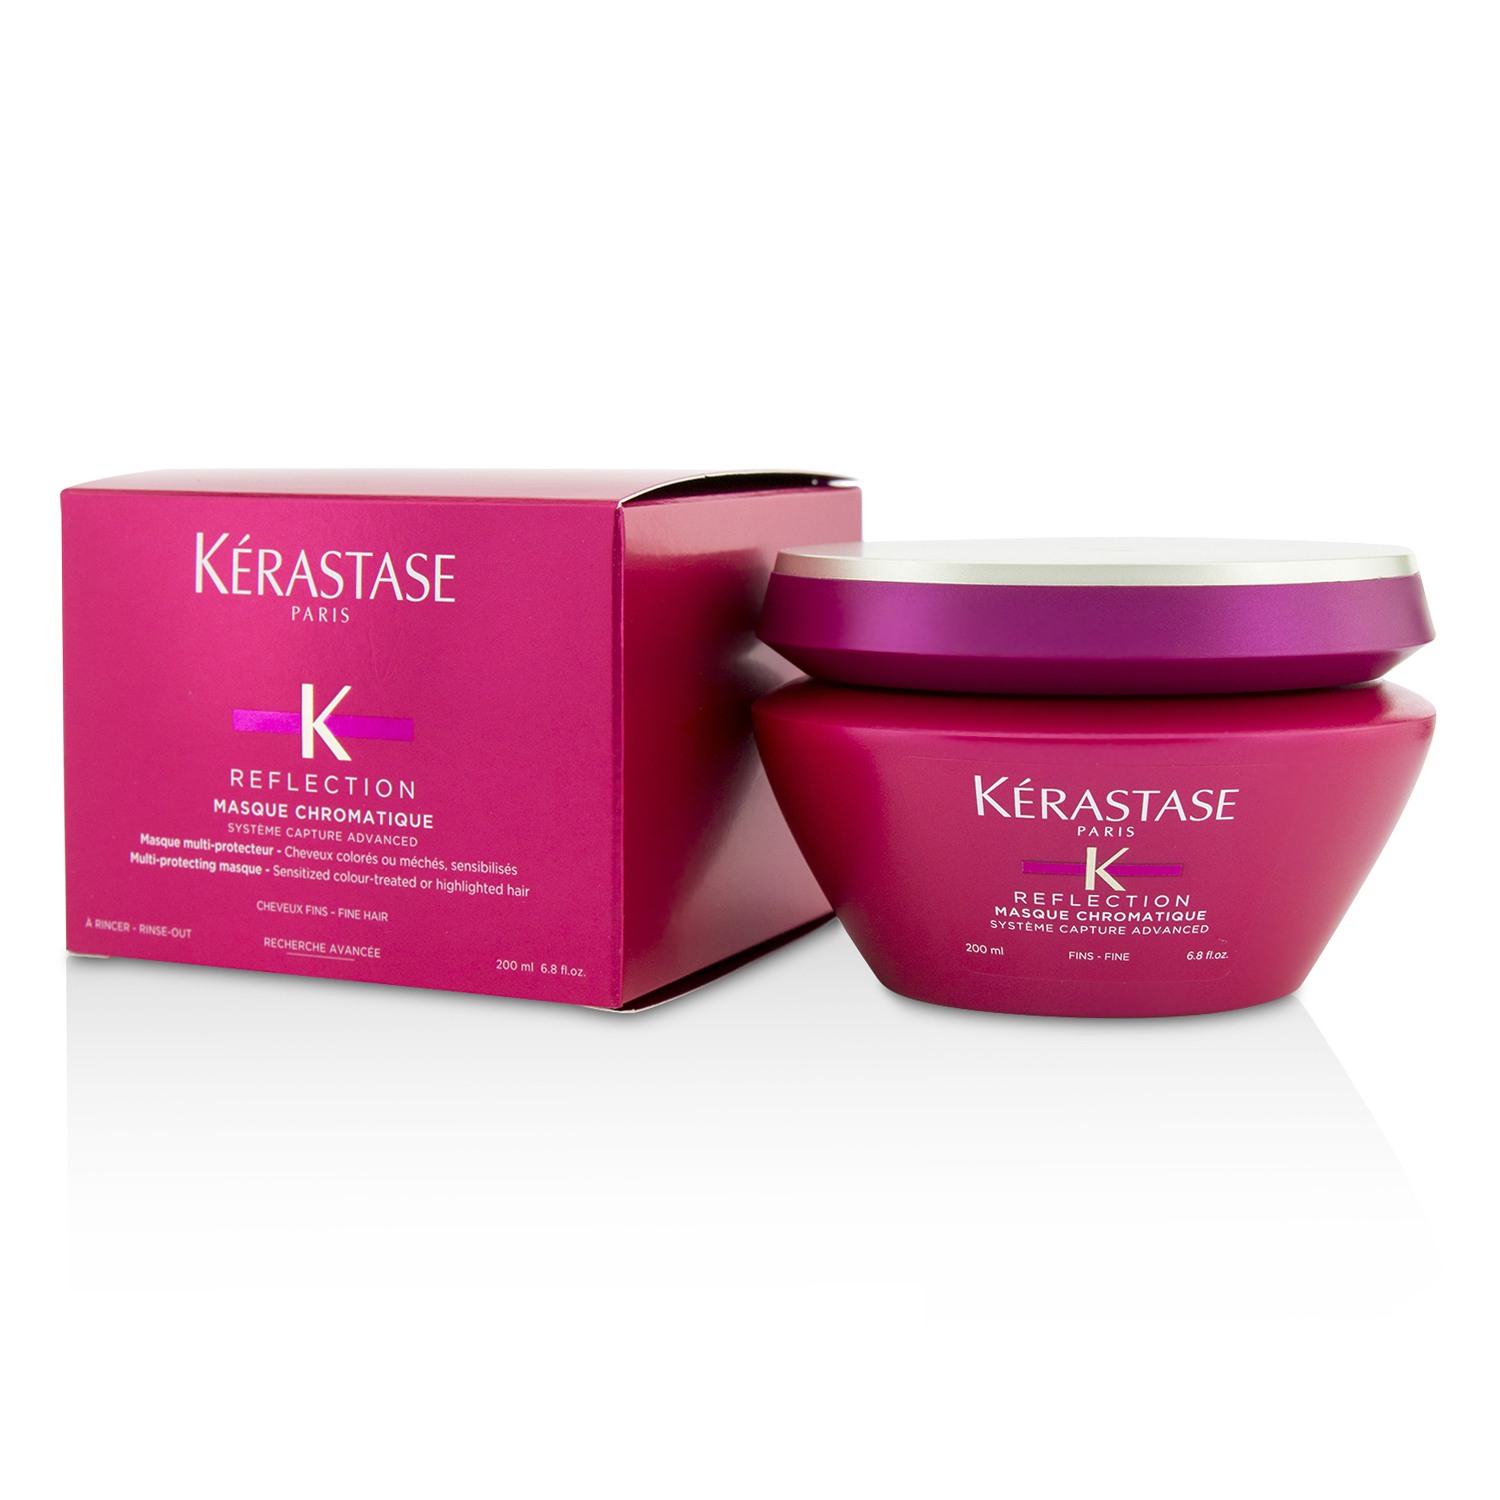 Reflection Masque Chromatique Multi-Protecting Masque (Sensitized Colour-Treated or Highlighted Hair - Fine Hair) Kerastase Image